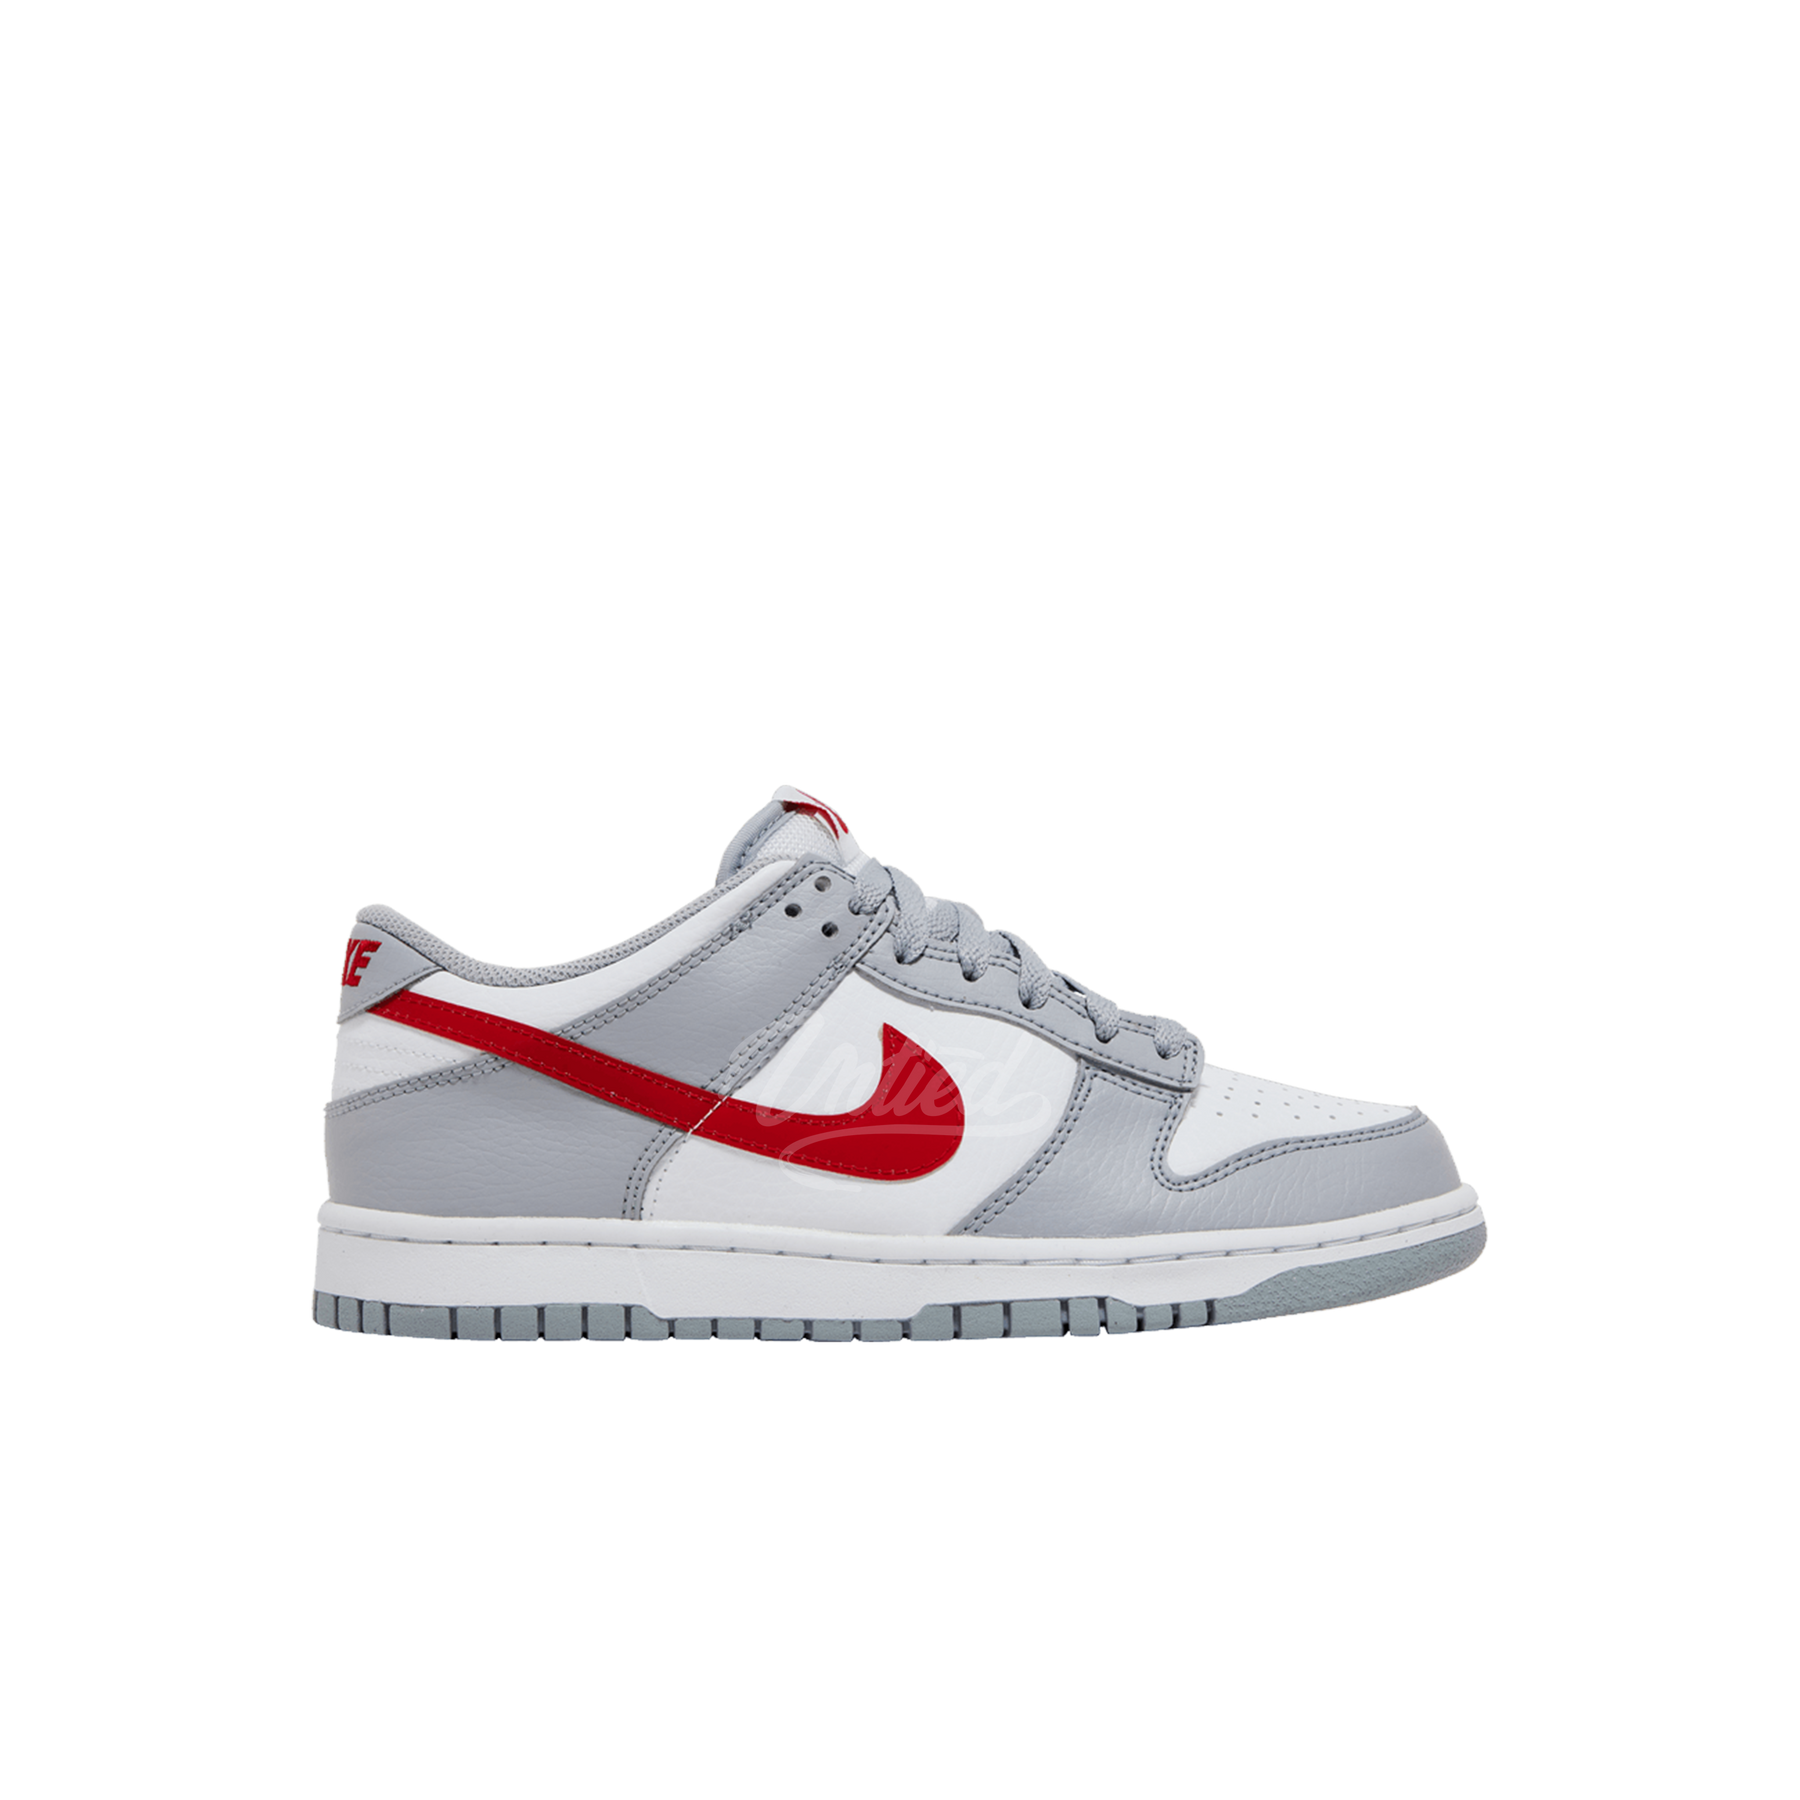 Nike Dunk Low "White Wolf Grey/University Red" (GS)